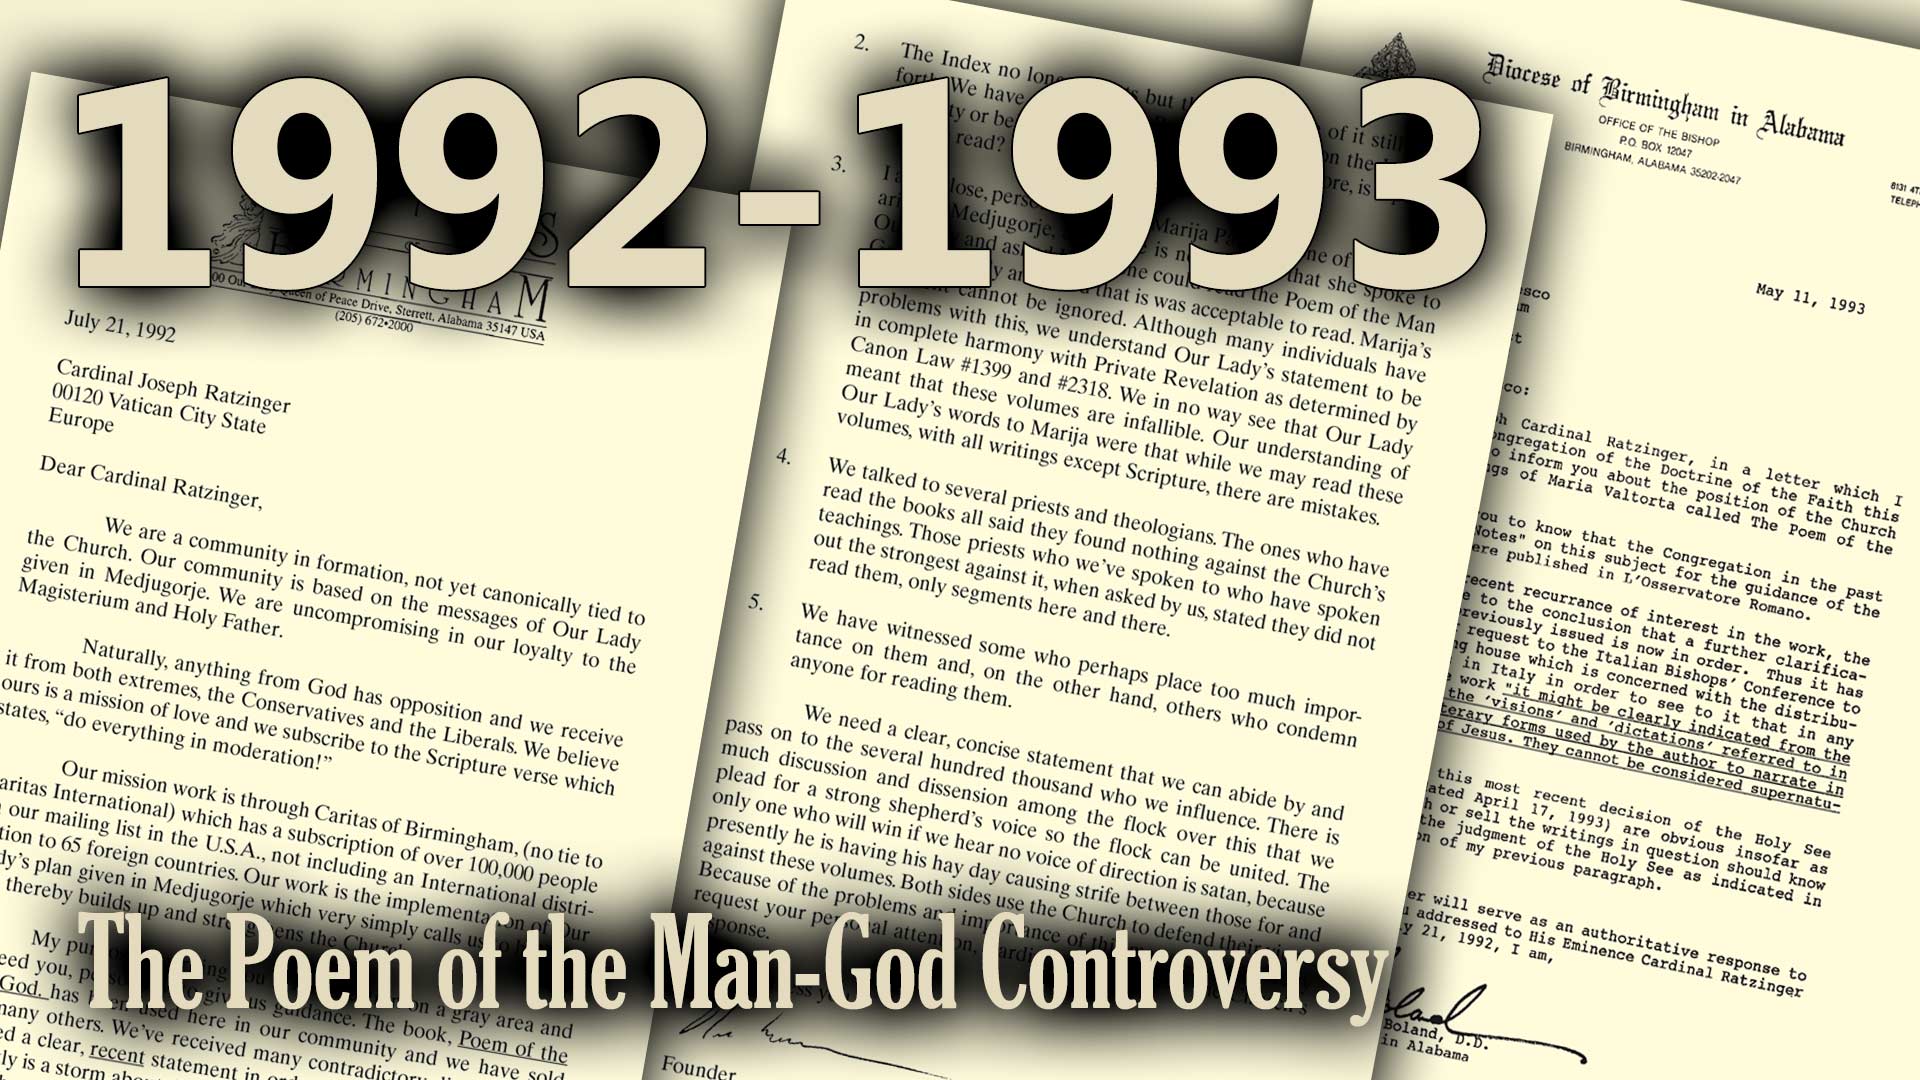 14-Poem-of-the-Man-God-Controversy